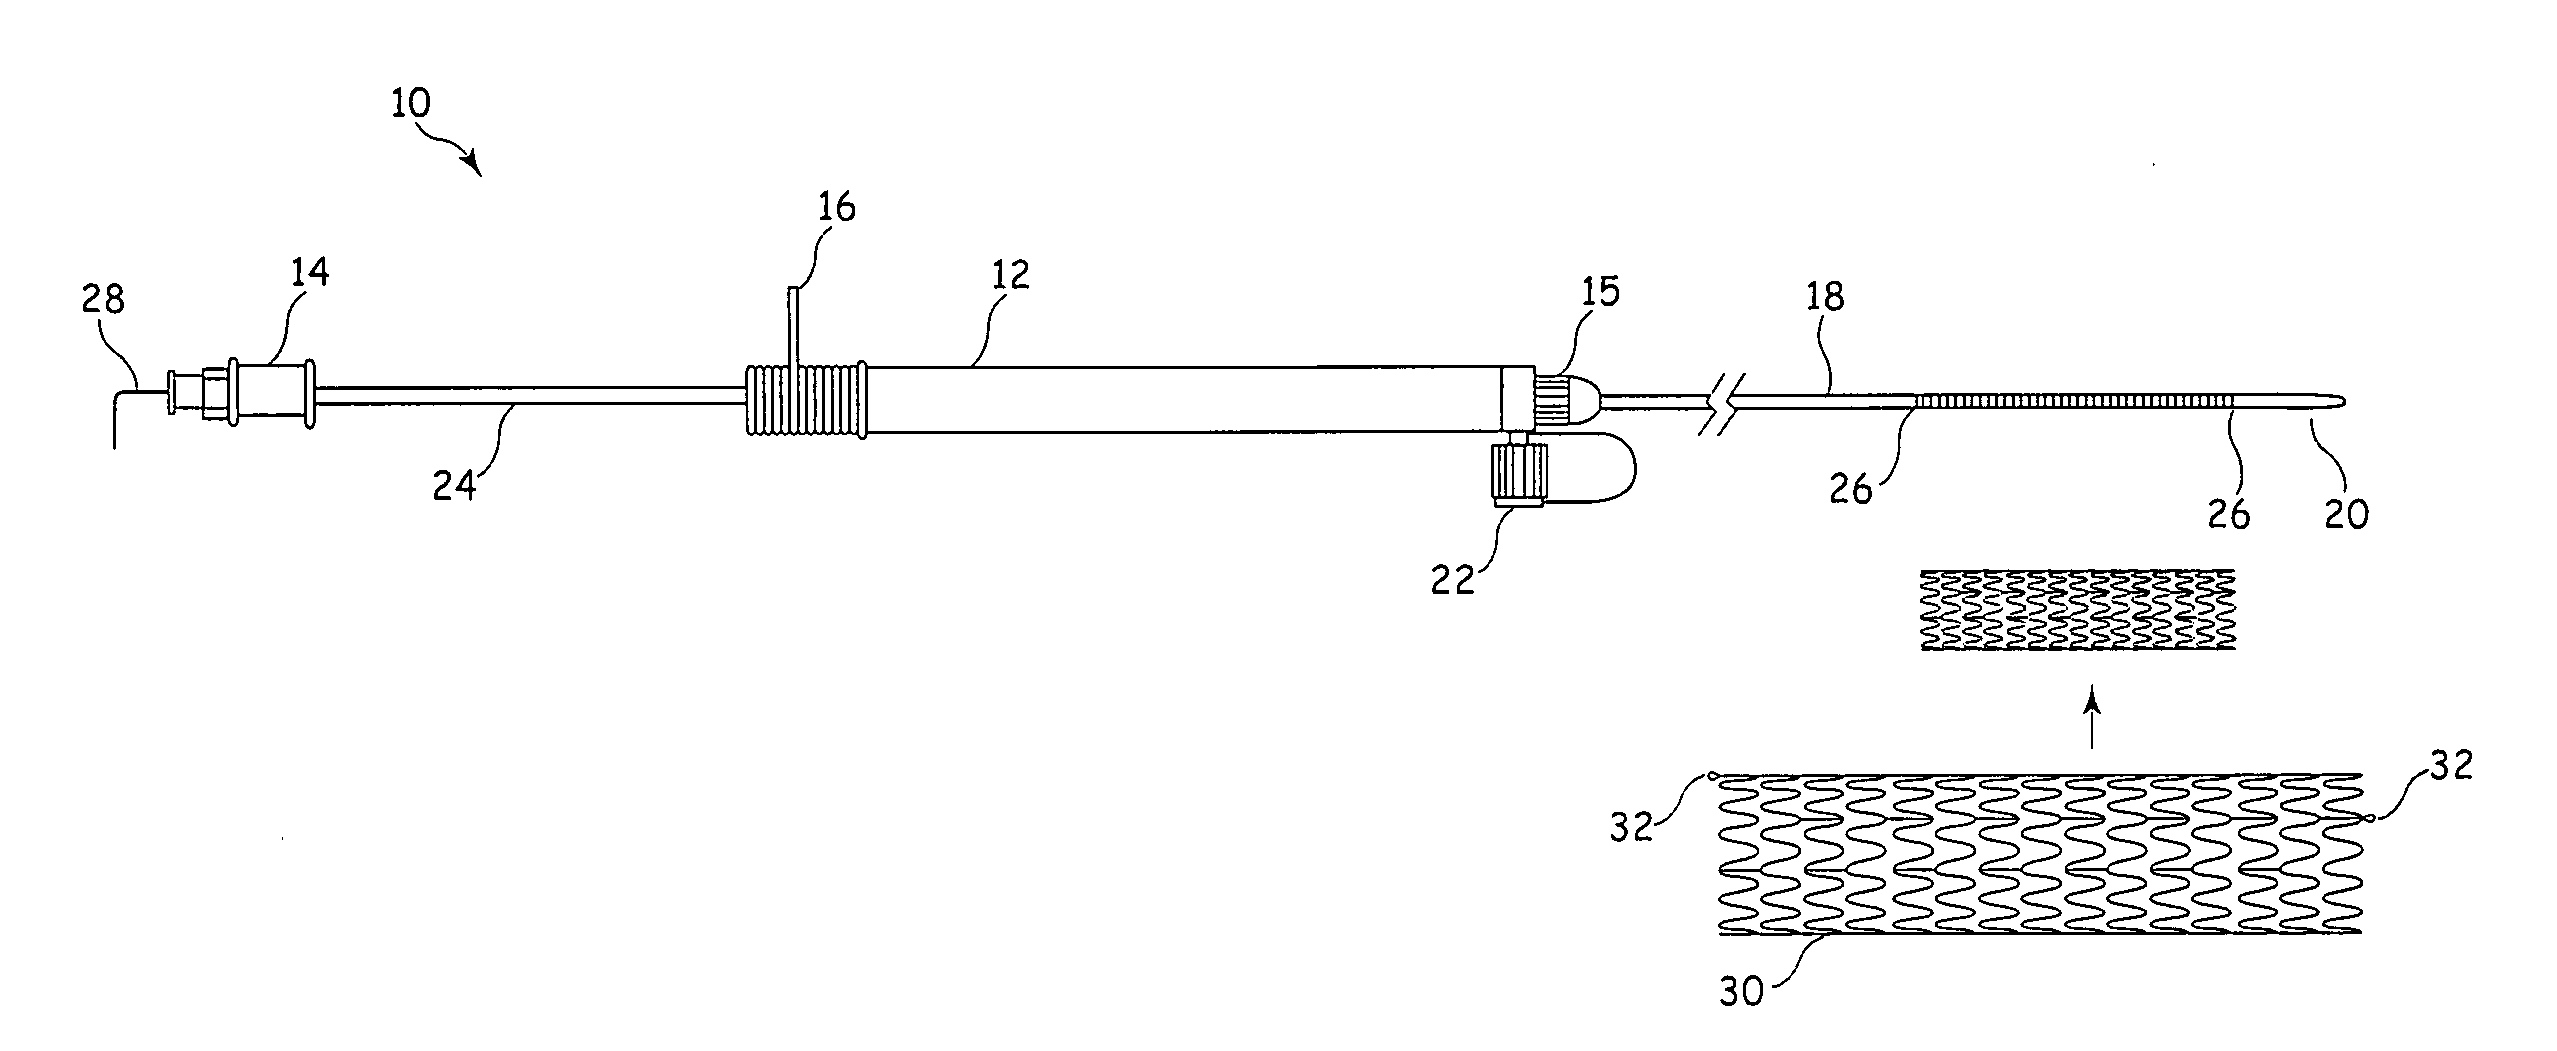 Deployment handle for an implant deployment device